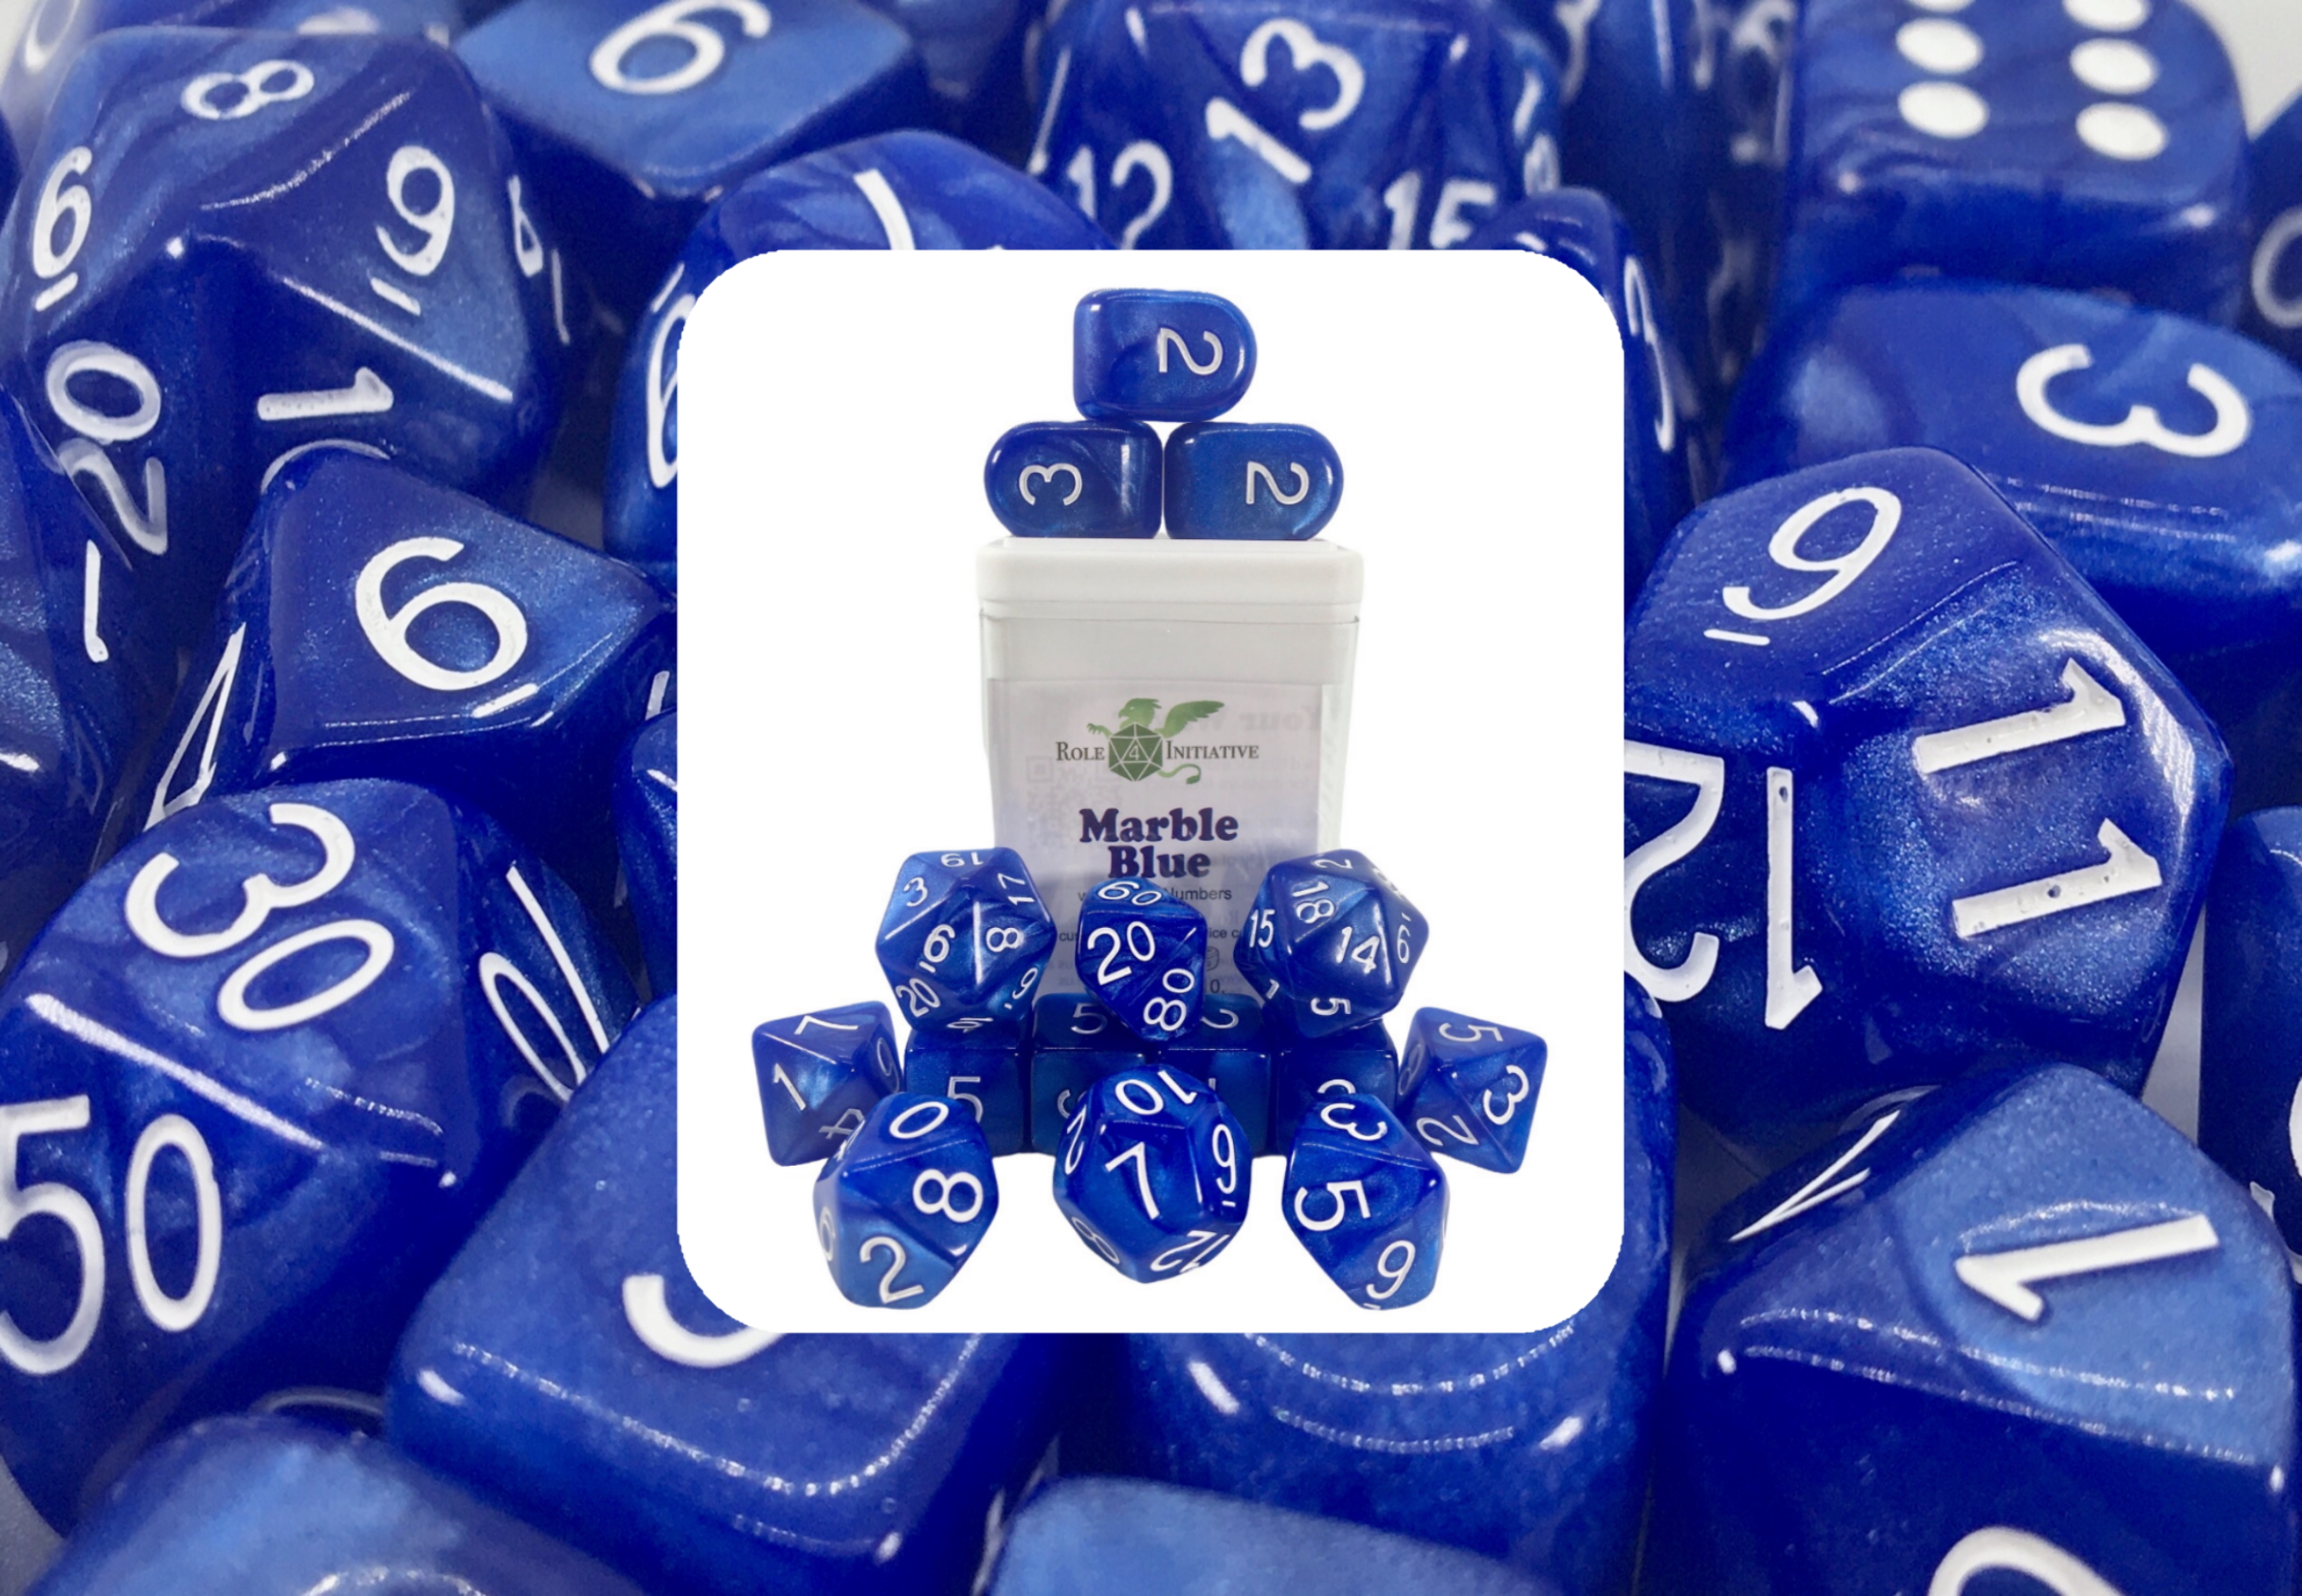 Role 4 Initiative: Polyhedral 15 Dice Set: MARBLE BLUE ARCHD4 